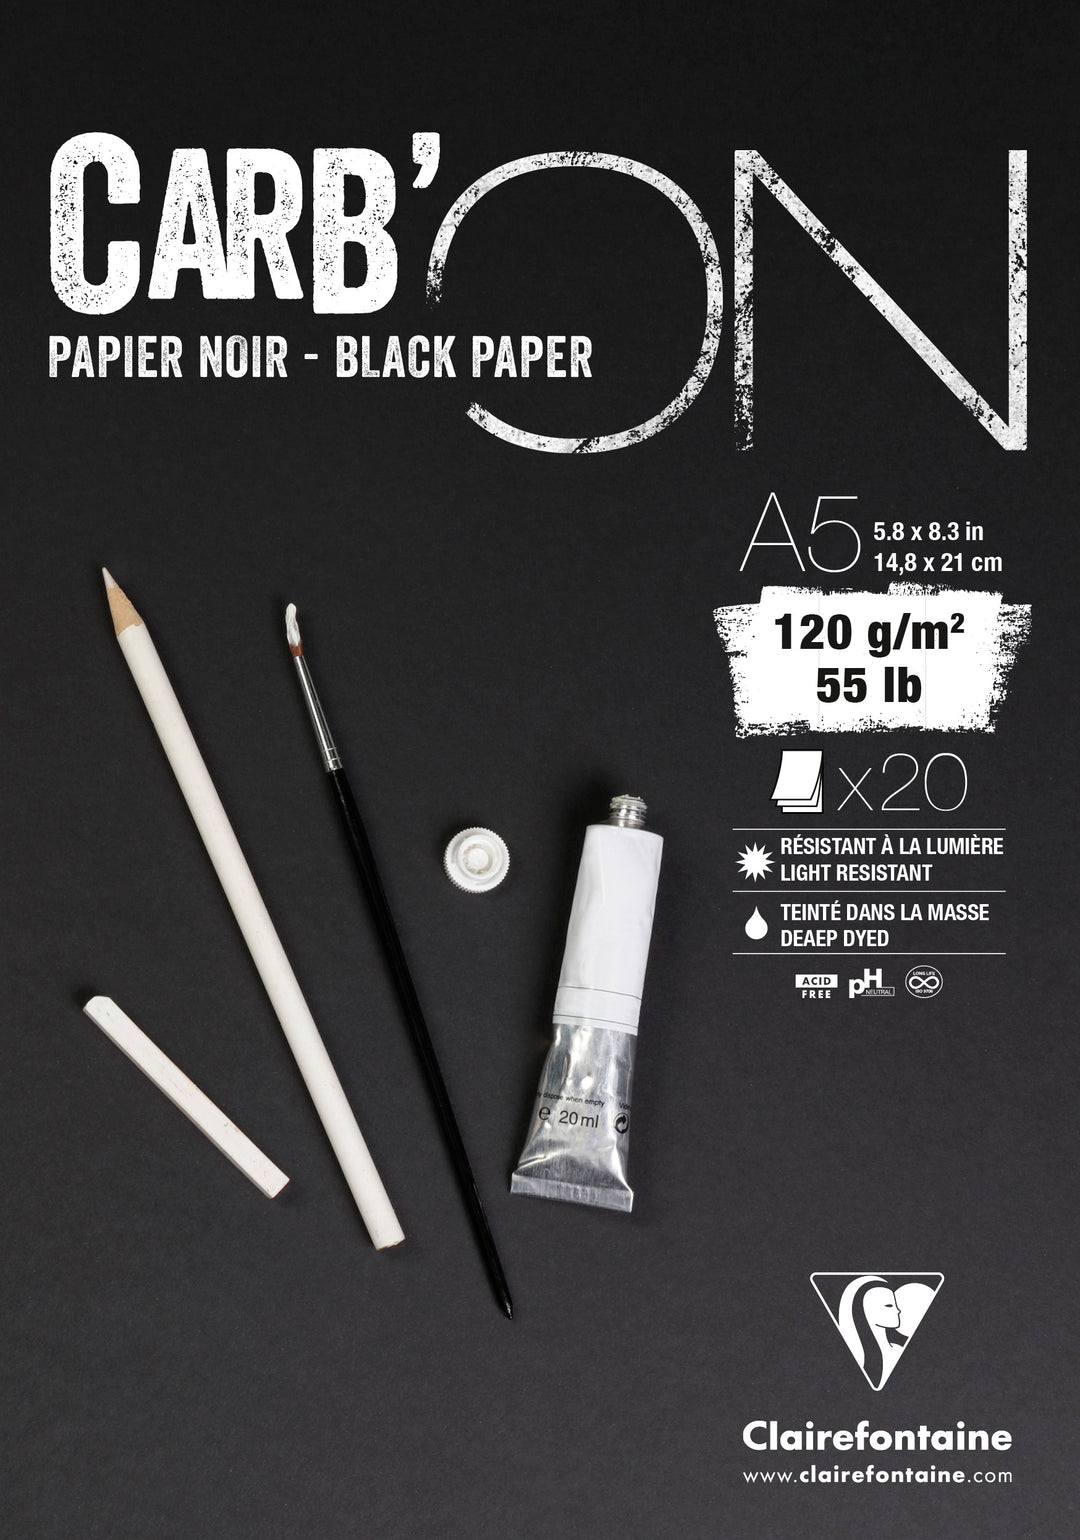 Clairefontaine Fine Art Carb'On Black Paper 120g Glued Pad